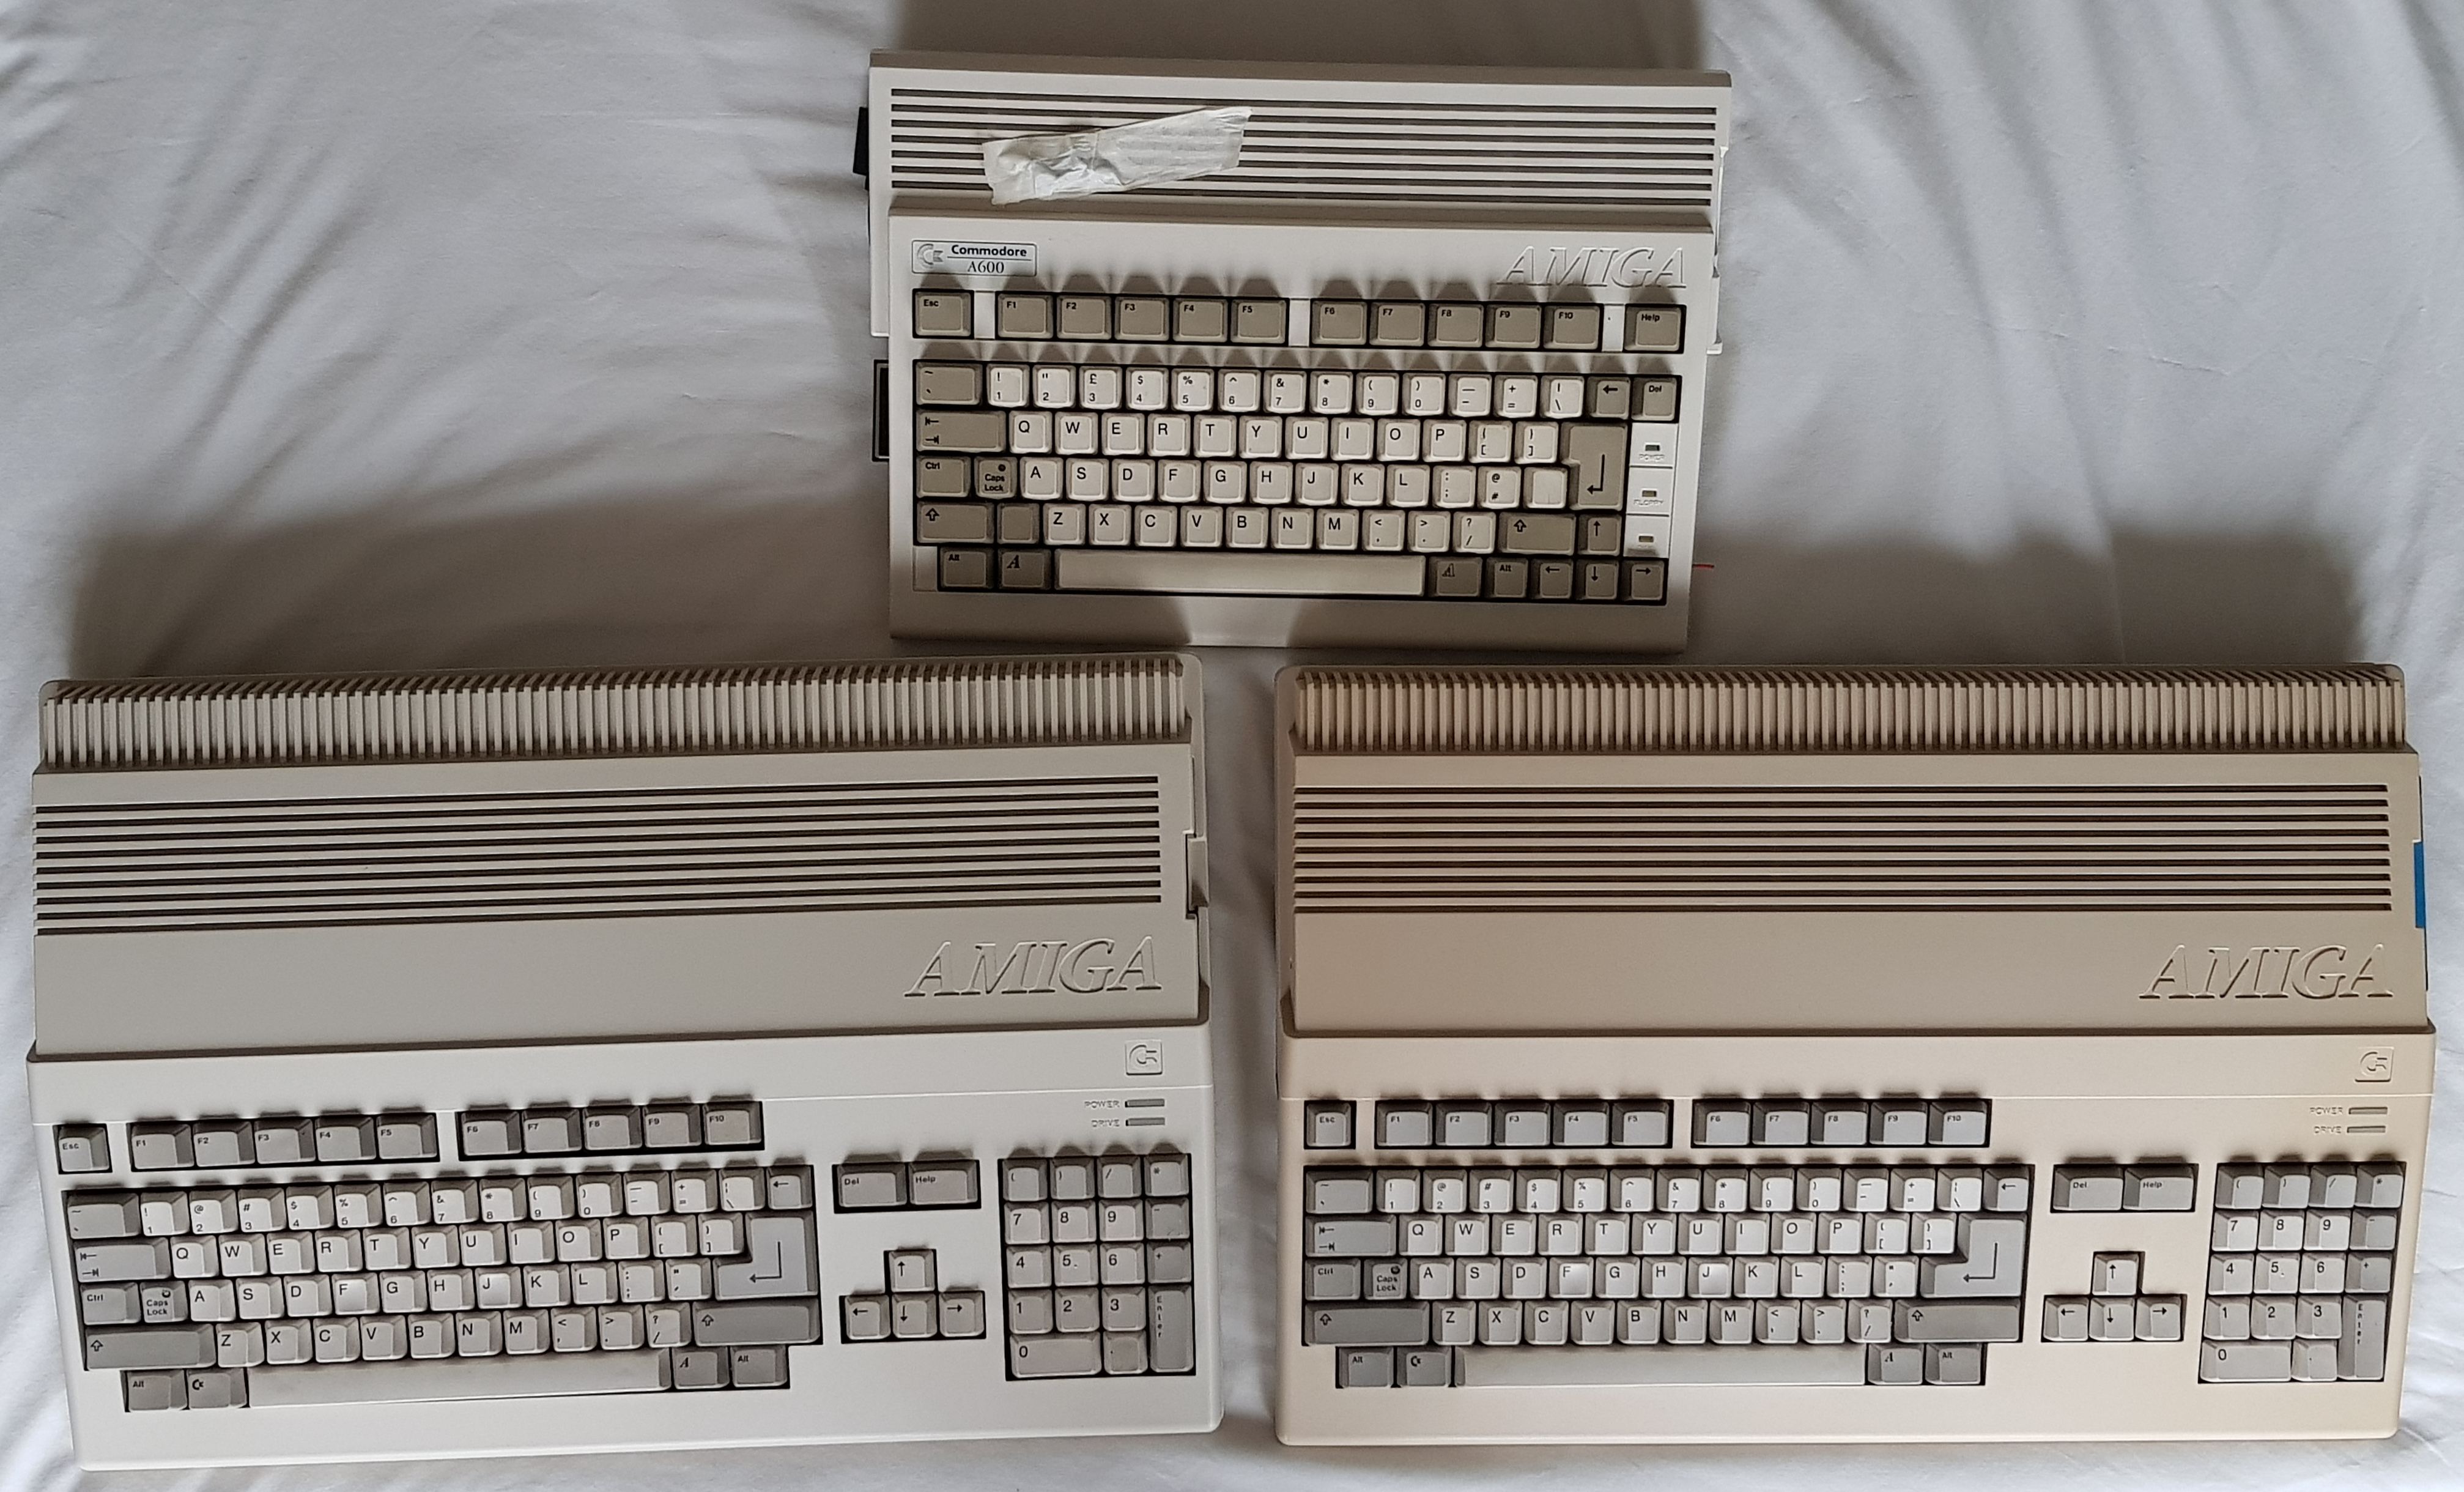 Chances are that if you have an old Amiga, it’s not quite the colour it once was: it’s slowly doing a David Dickinson and getting more tanned as it gets […]